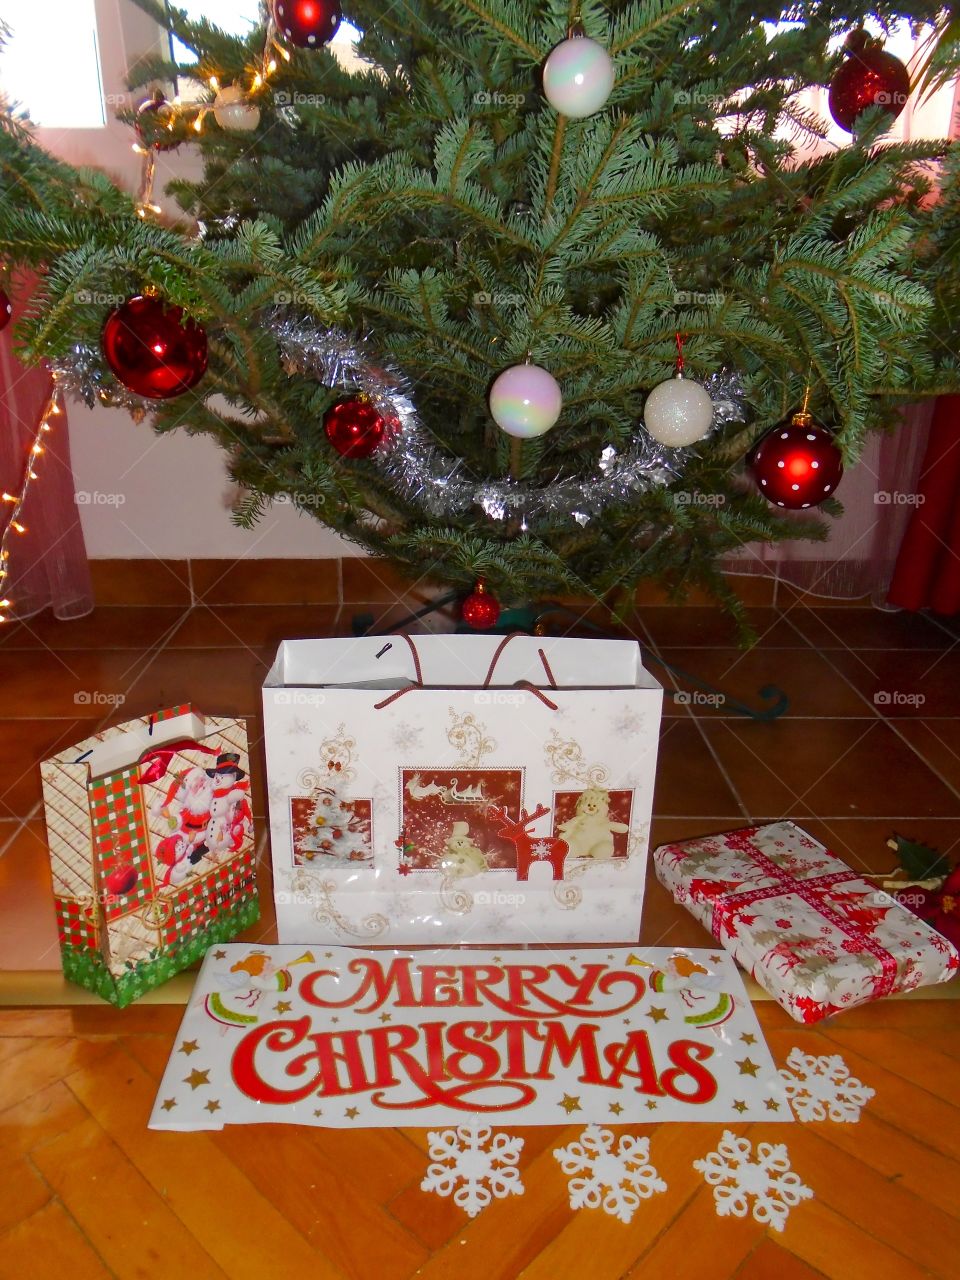 Presents under the decorated Christmas tree